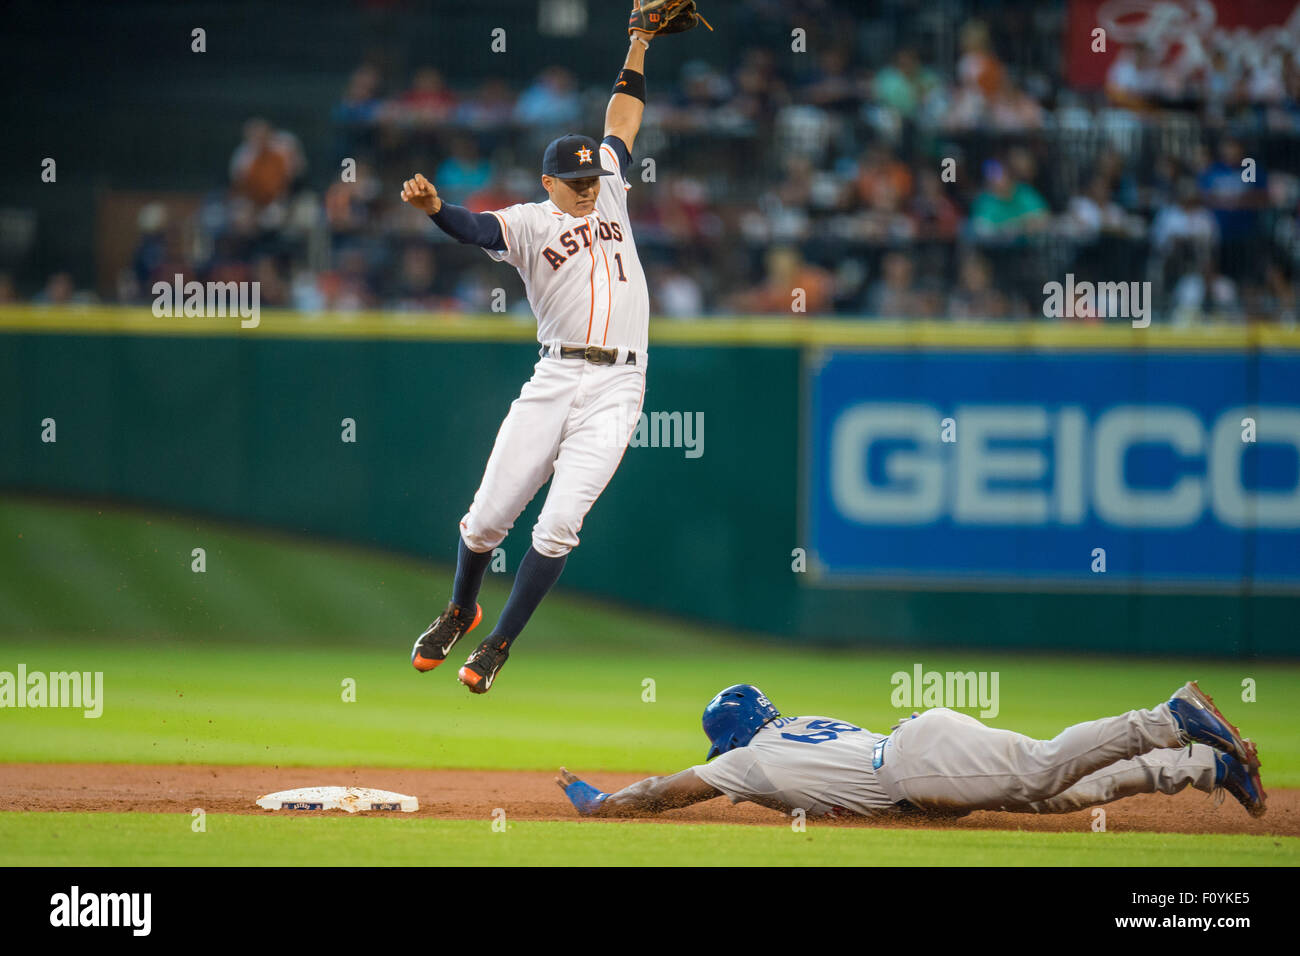 Houston, TX, USA. 23rd Aug, 2015. Los Angeles Dodgers right fielder Yasiel Puig (66) safely steals second base as a high throw to Houston Astros shortstop Carlos Correa (1) pulls him off the base during the 2nd inning of a Major League Baseball game between the Houston Astros and the Los Angeles Dodgers at Minute Maid Park in Houston, TX. Trask Smith/CSM/Alamy Live News Stock Photo